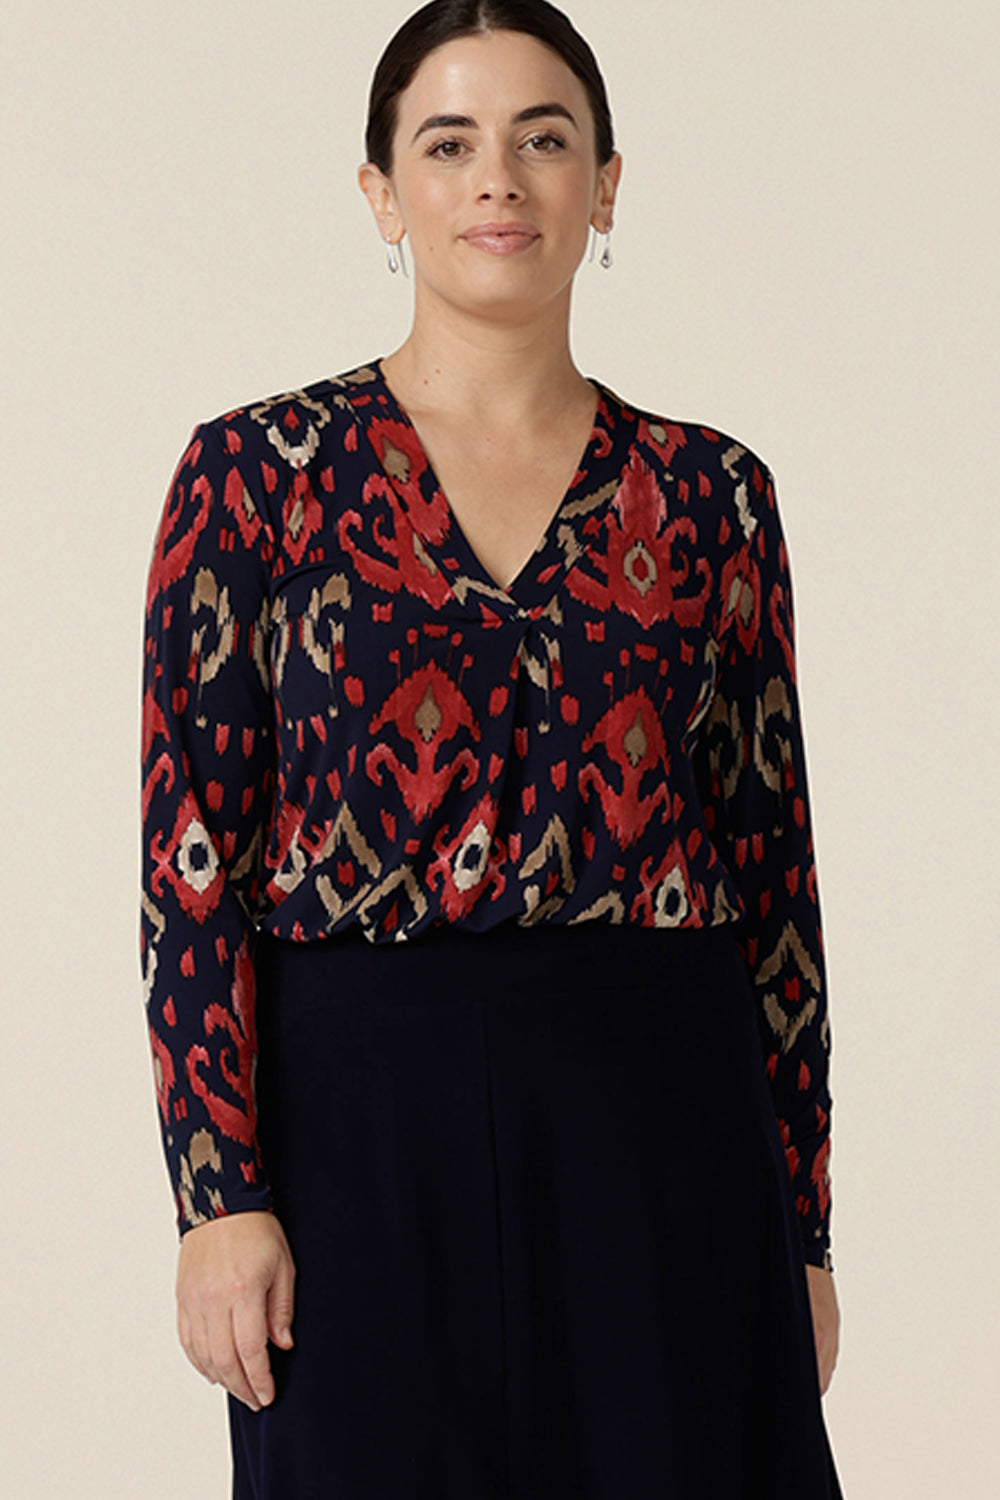 A great workwear top for women, the Dakota Top in Ikat is a V-neck, long sleeve top in soft stretch jersey. Shown here in a size 10, this top is made in Australia in sizes 8 to 24, petite to plus sizes..